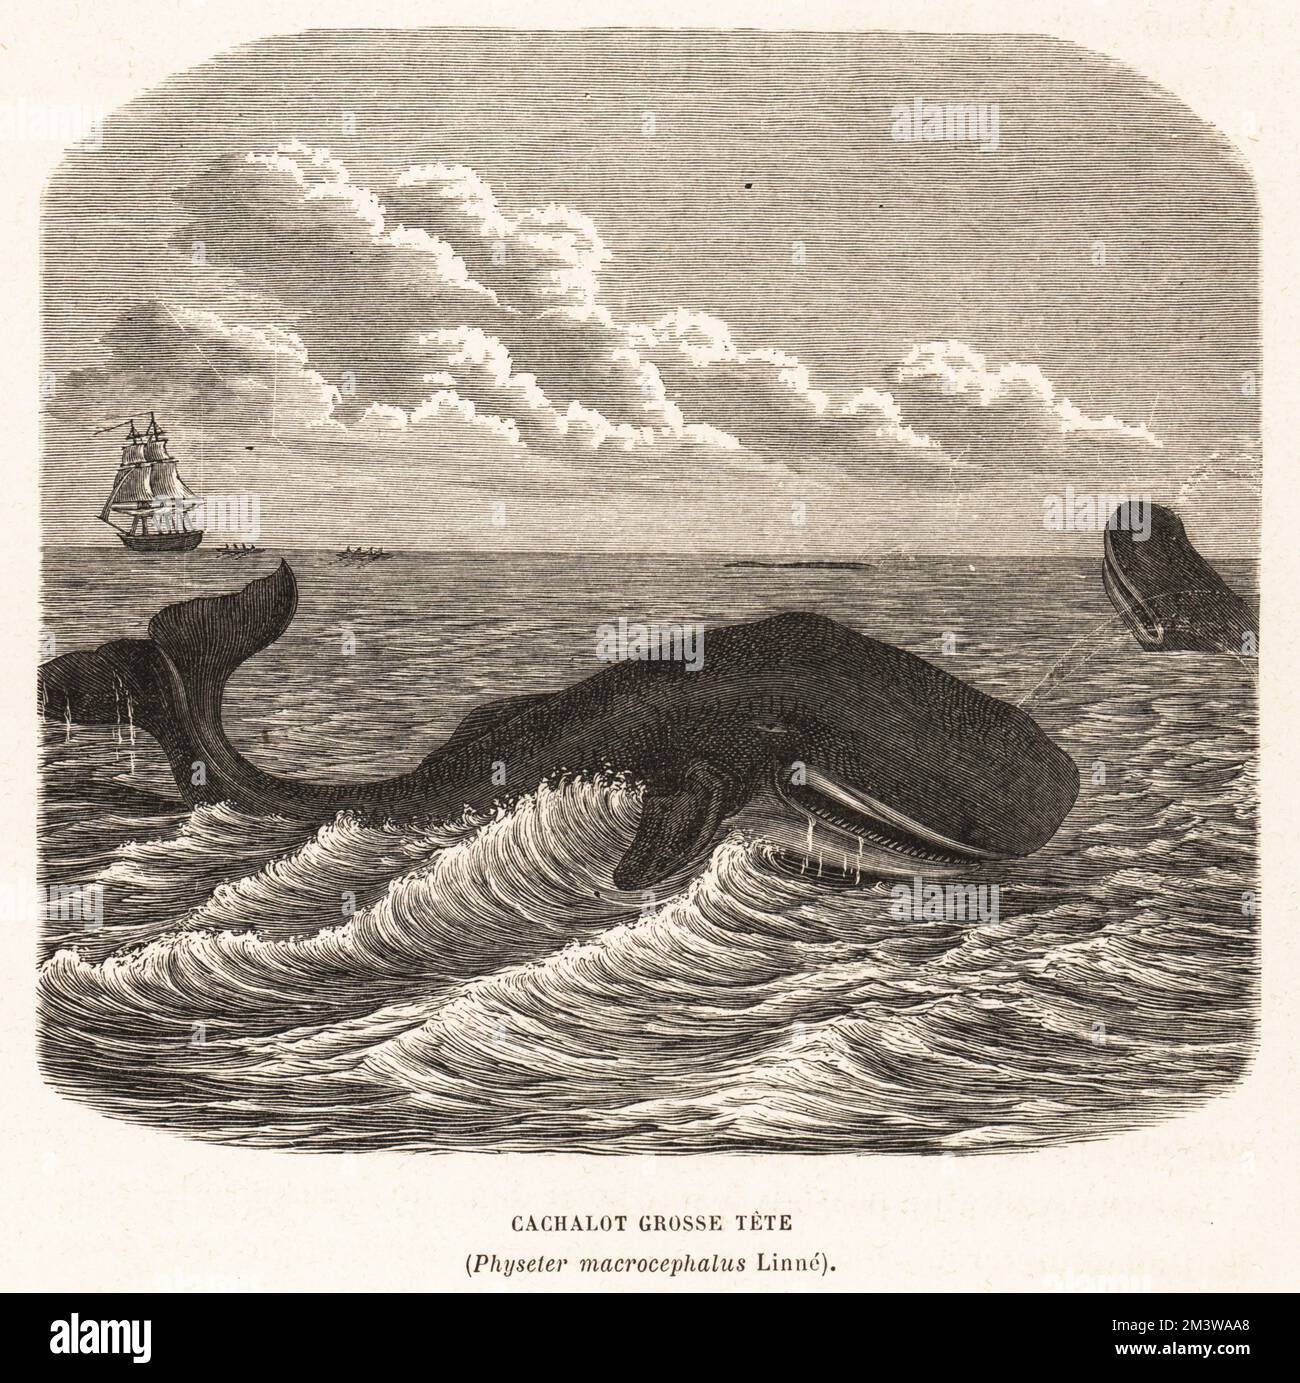 Sperm whale or cachalot, Physeter macrocephalus. A whaler hunting in the distance. Cachalot grosse tete. Woodcut from Alfred Fredol’s Le Monde de la Mer, the World of the Sea, edited by Olivier Fredol, Librairie Hachette et. Cie., Paris, 1881. Alfred Fredol was the pseudonym of French zoologist and botanist Alfred Moquin-Tandon, 1804-1863. Stock Photo